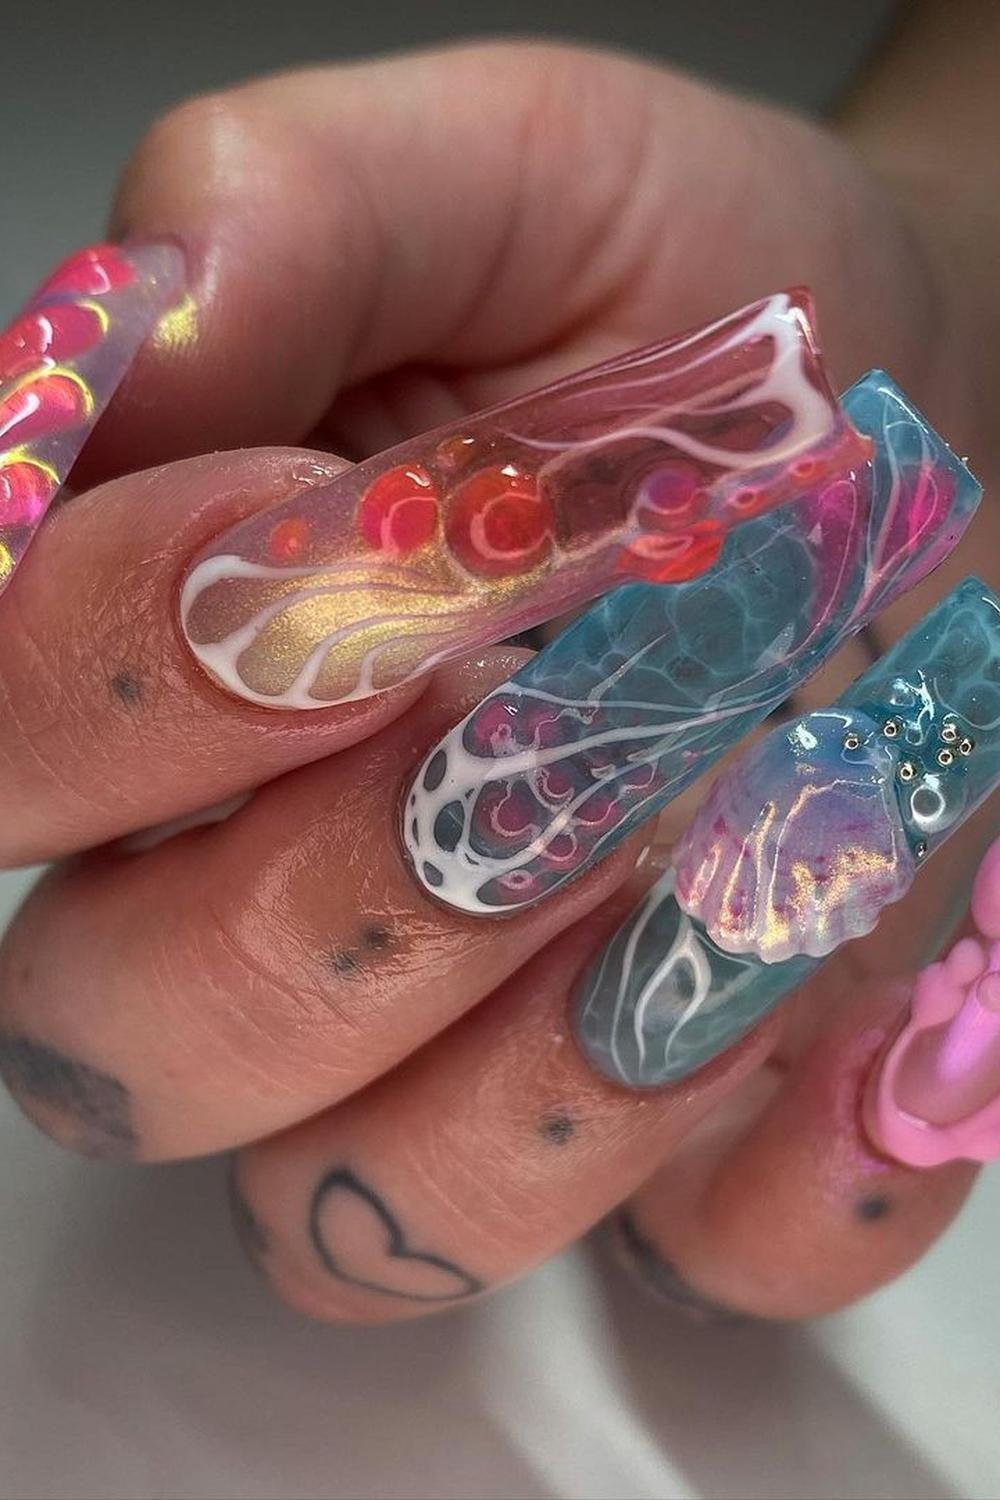 14 - Picture of Mermaid Nails